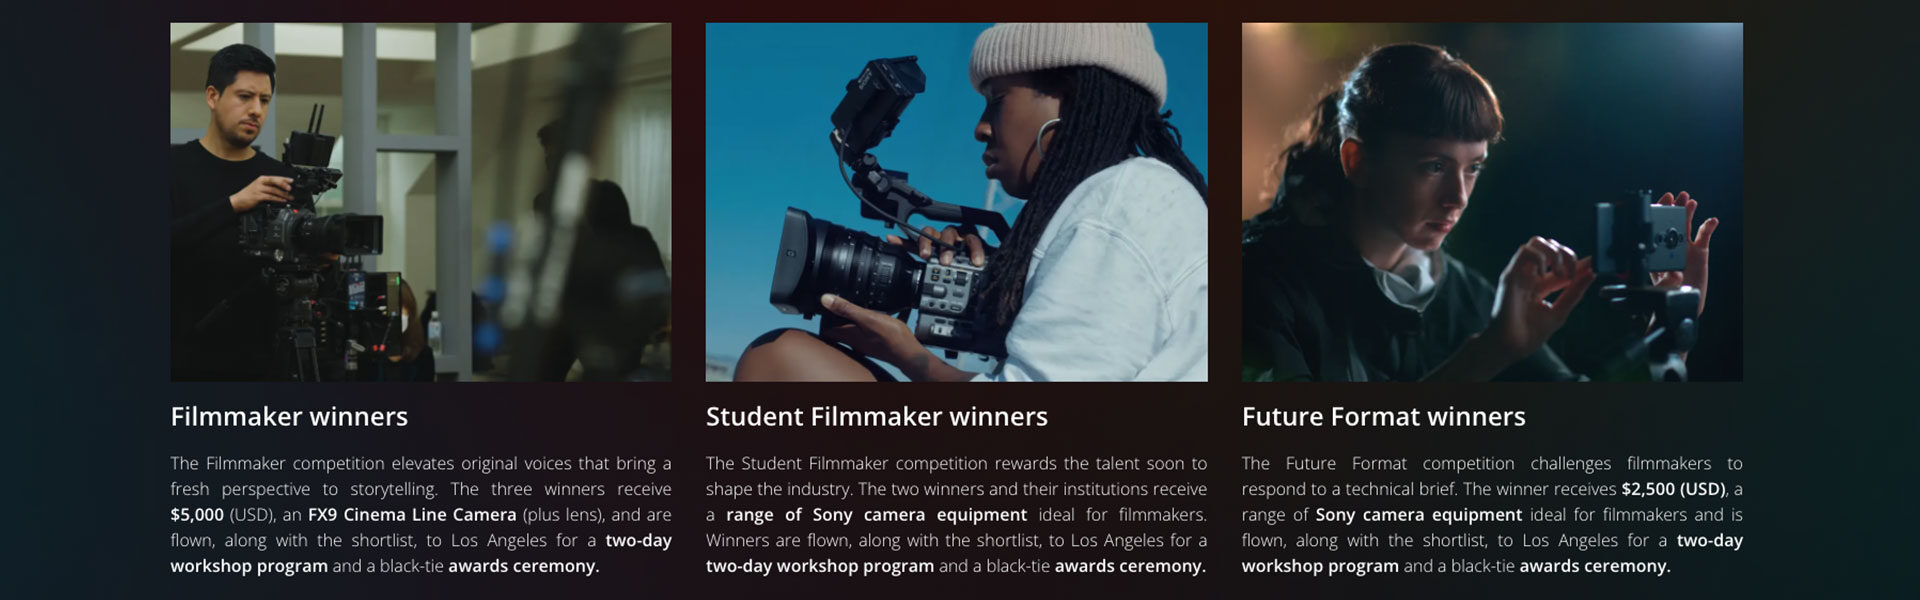 sony launches production awards in search of undiscovered filmmaking talent moviescope